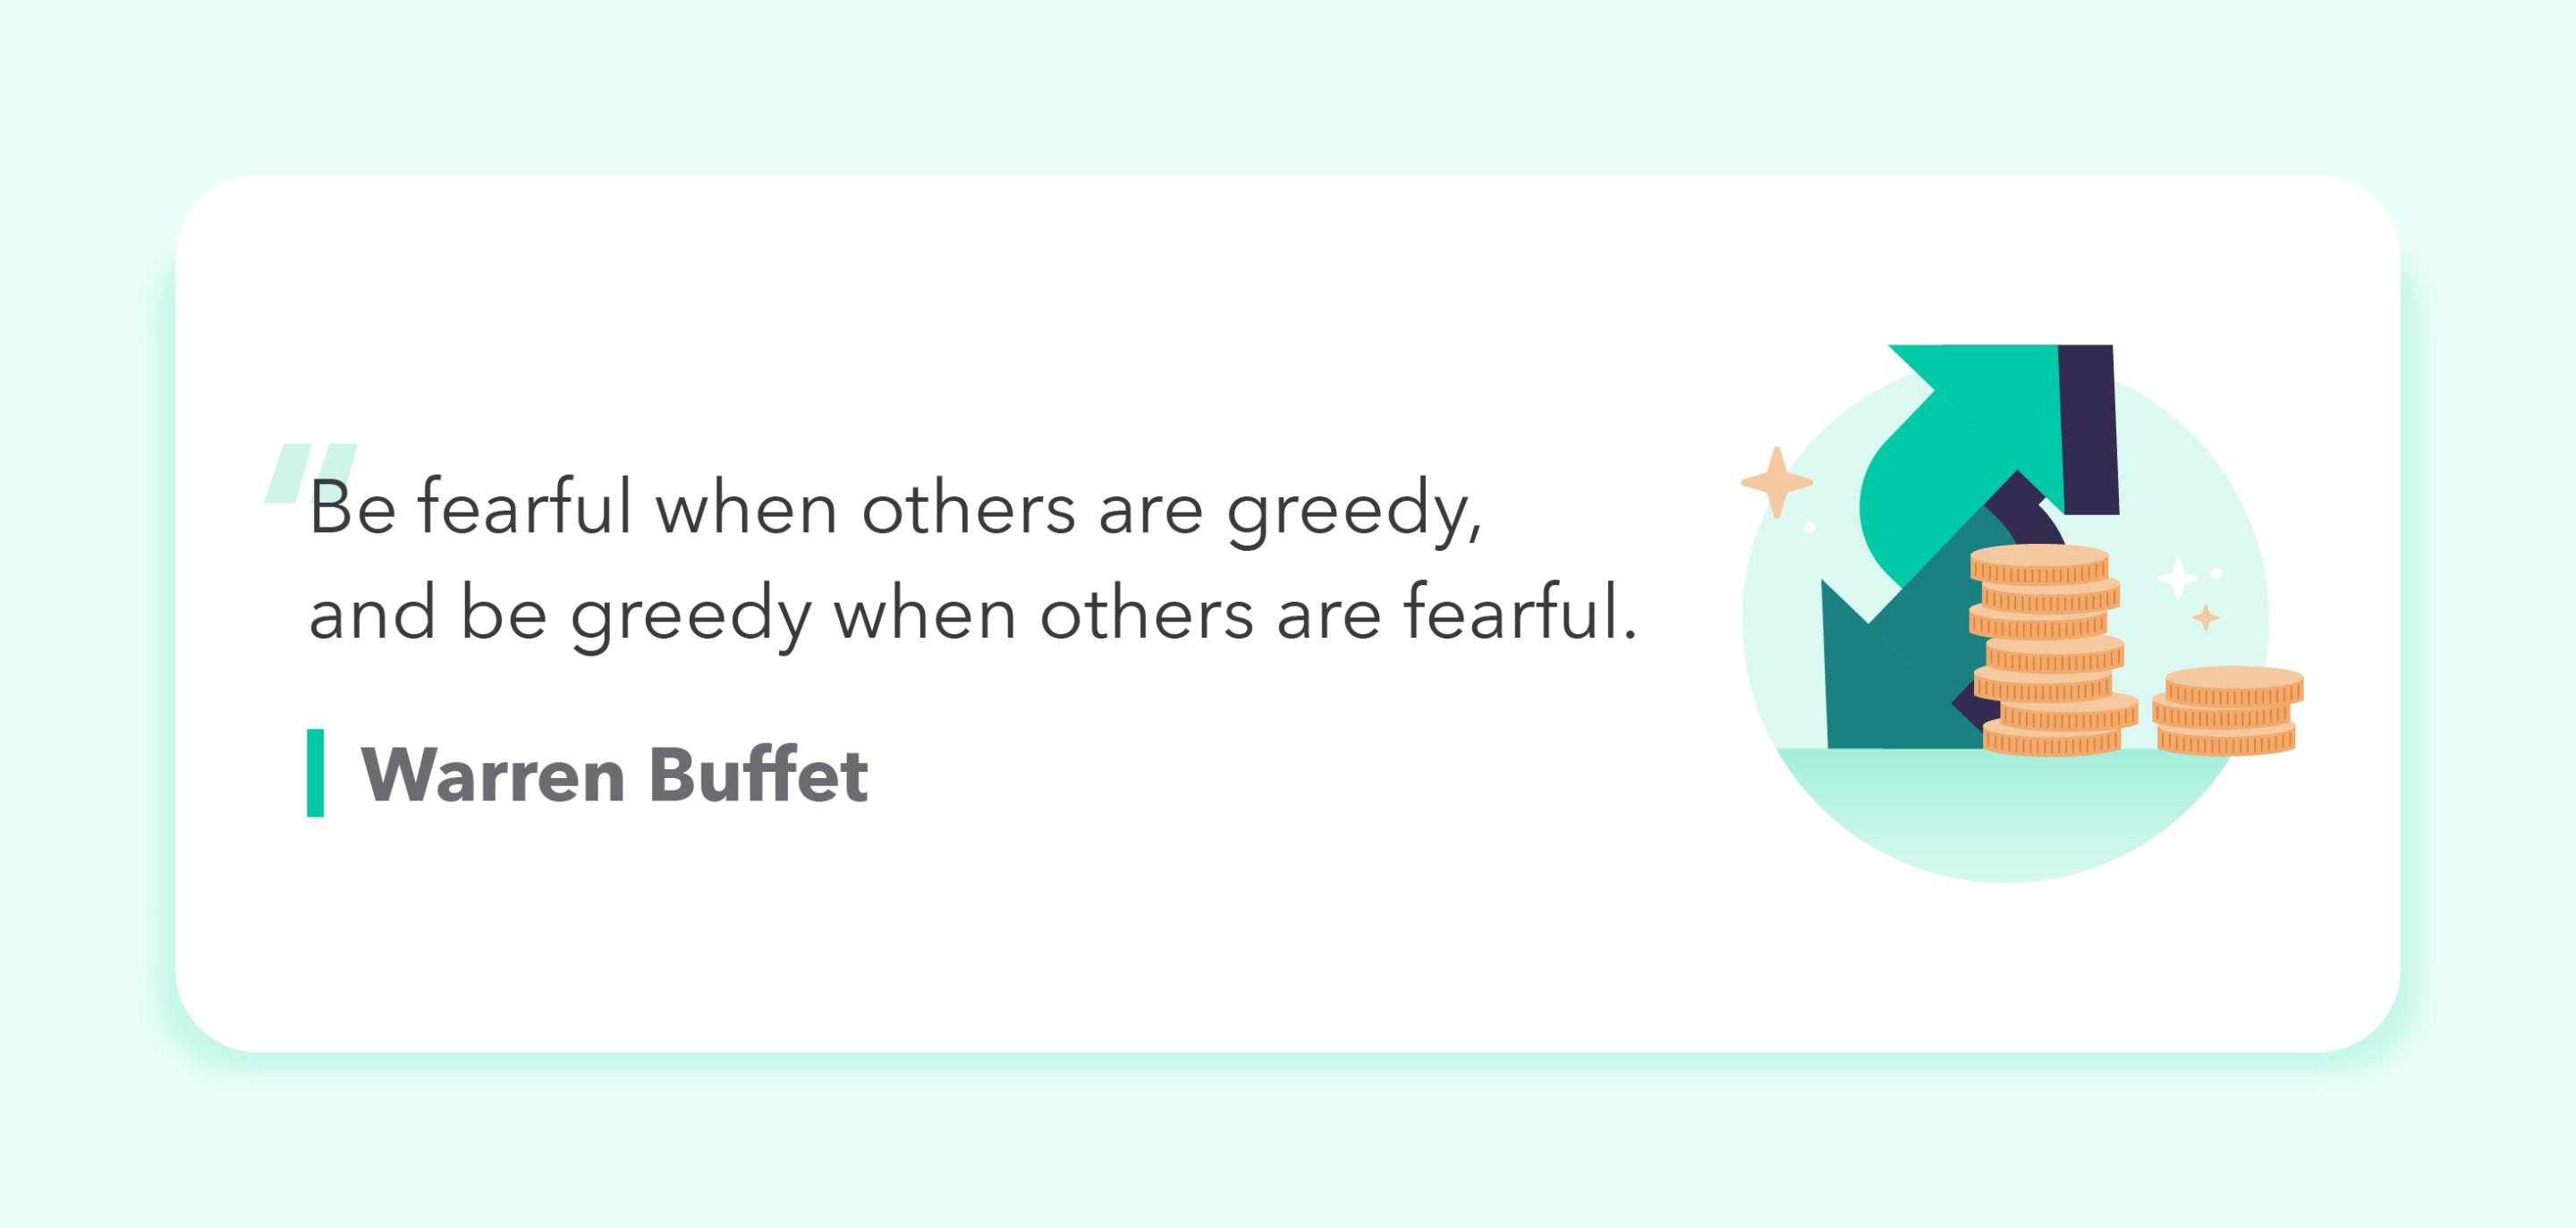 Quote from Warren Buffet: "Be fearful when others are greedy, and be greedy when others are fearful." 